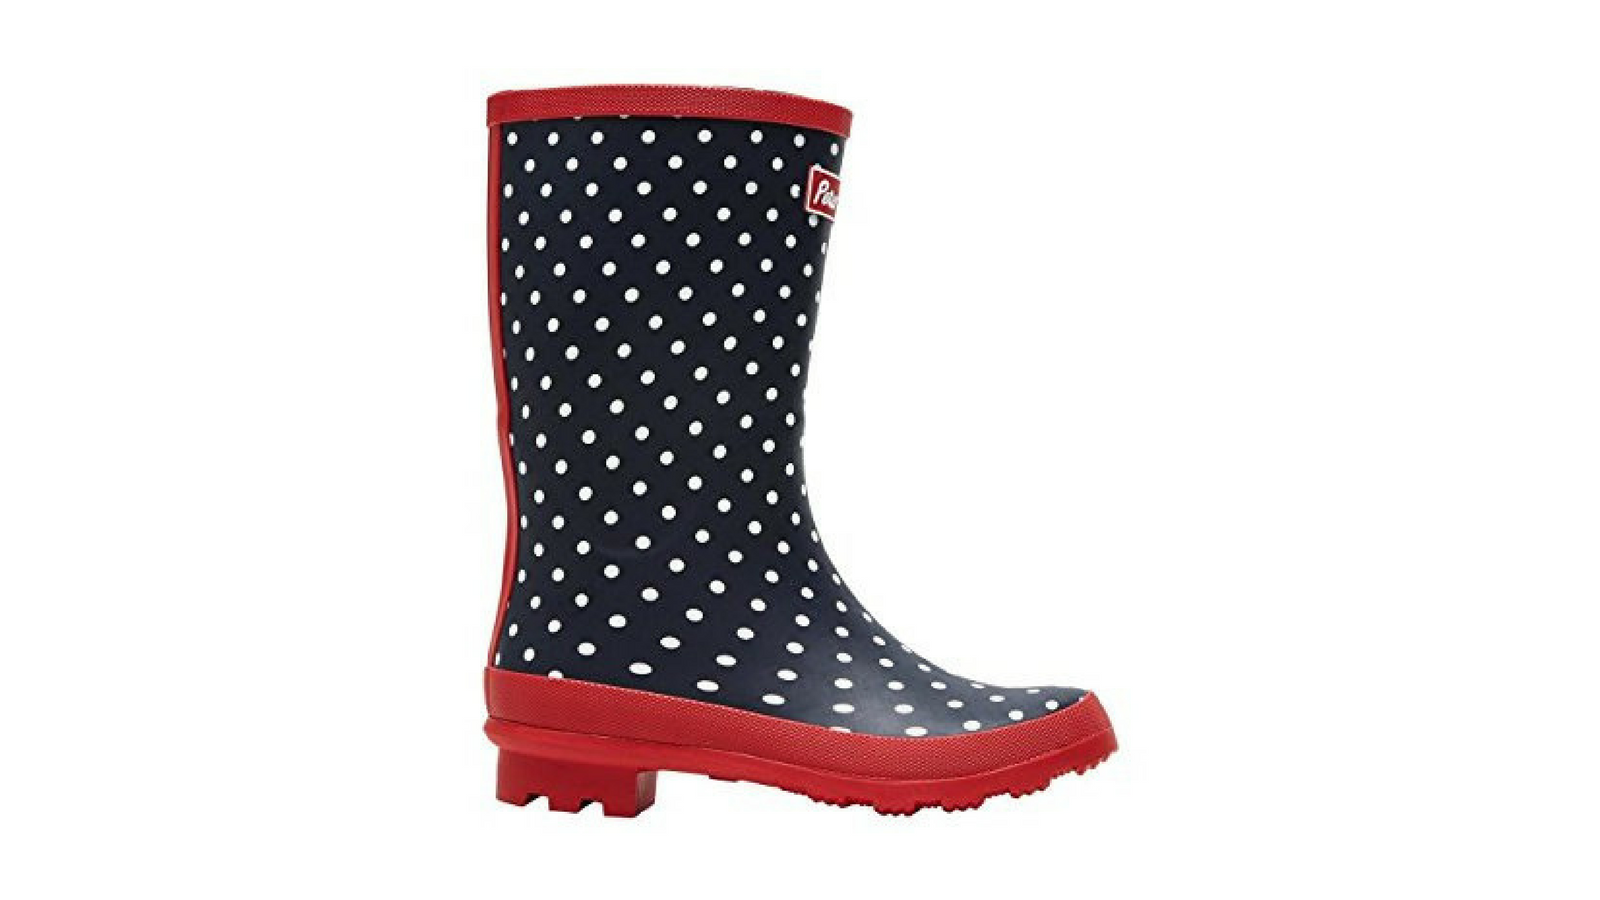 Rubber Boots PNG HD - 121437